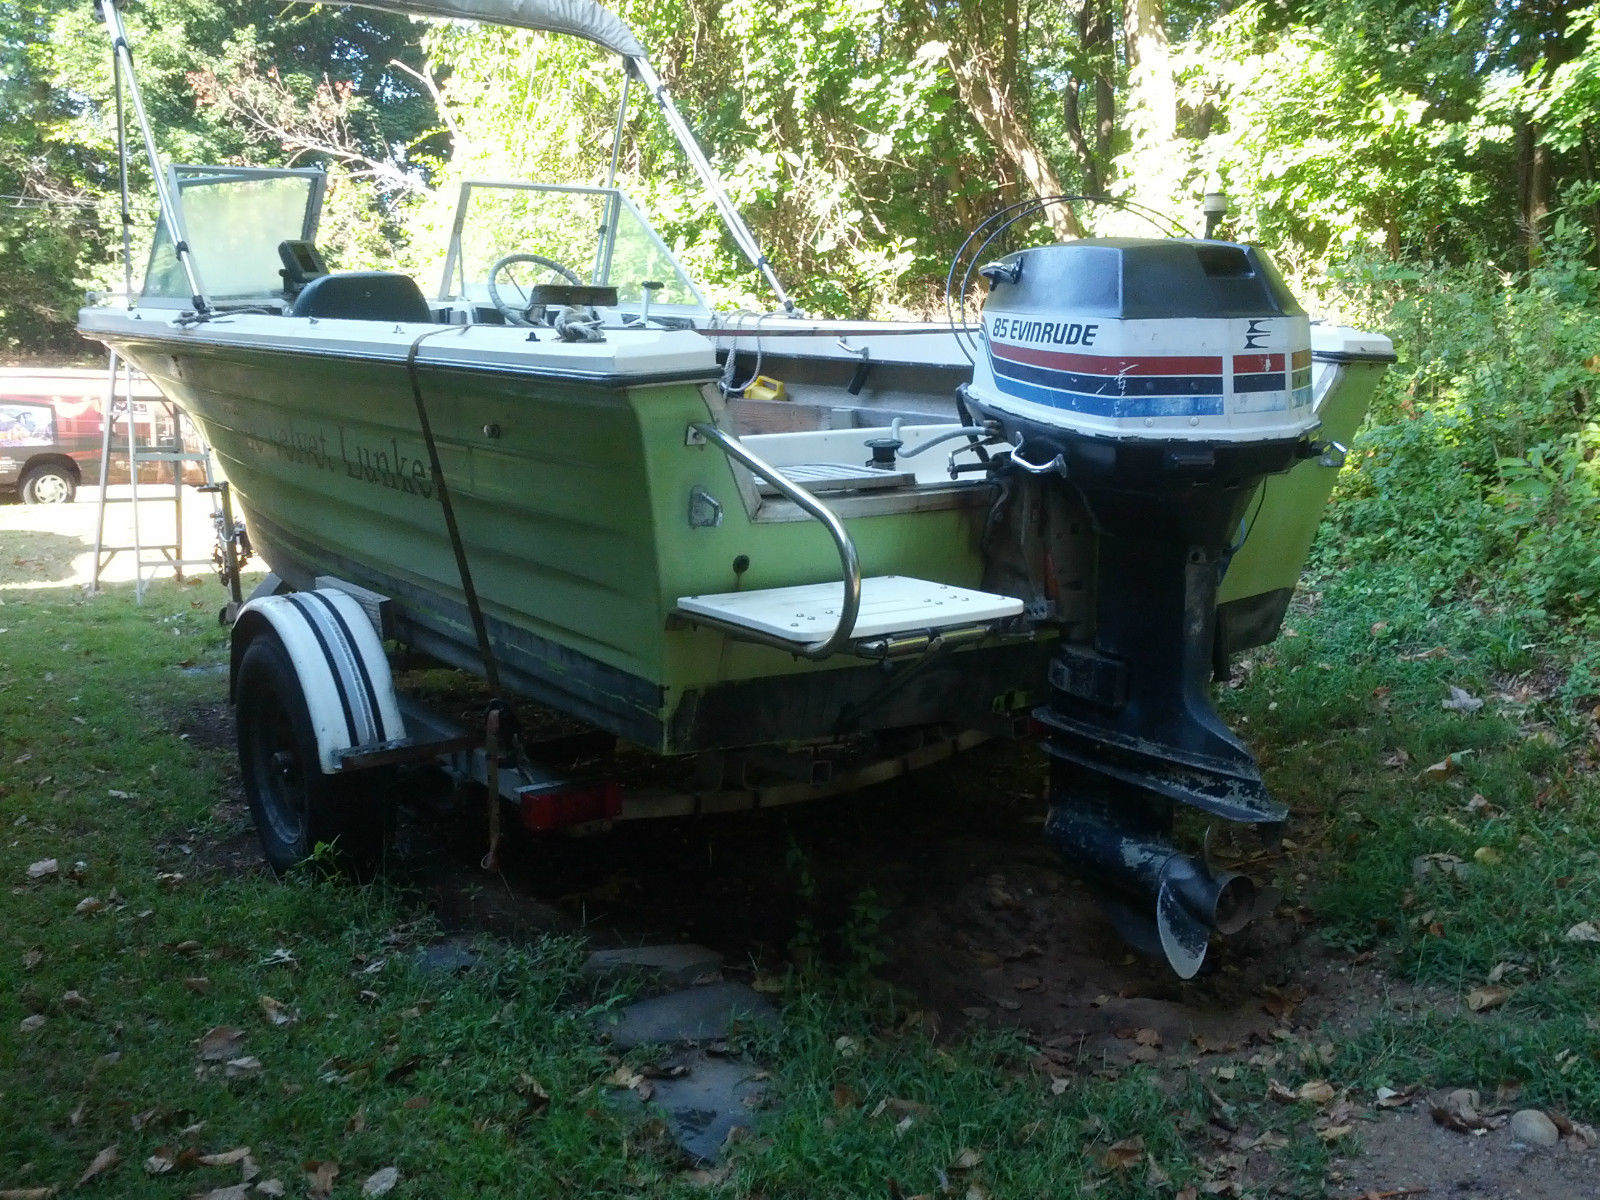 manatee 1972 for sale for $950 - boats-from-usa.com